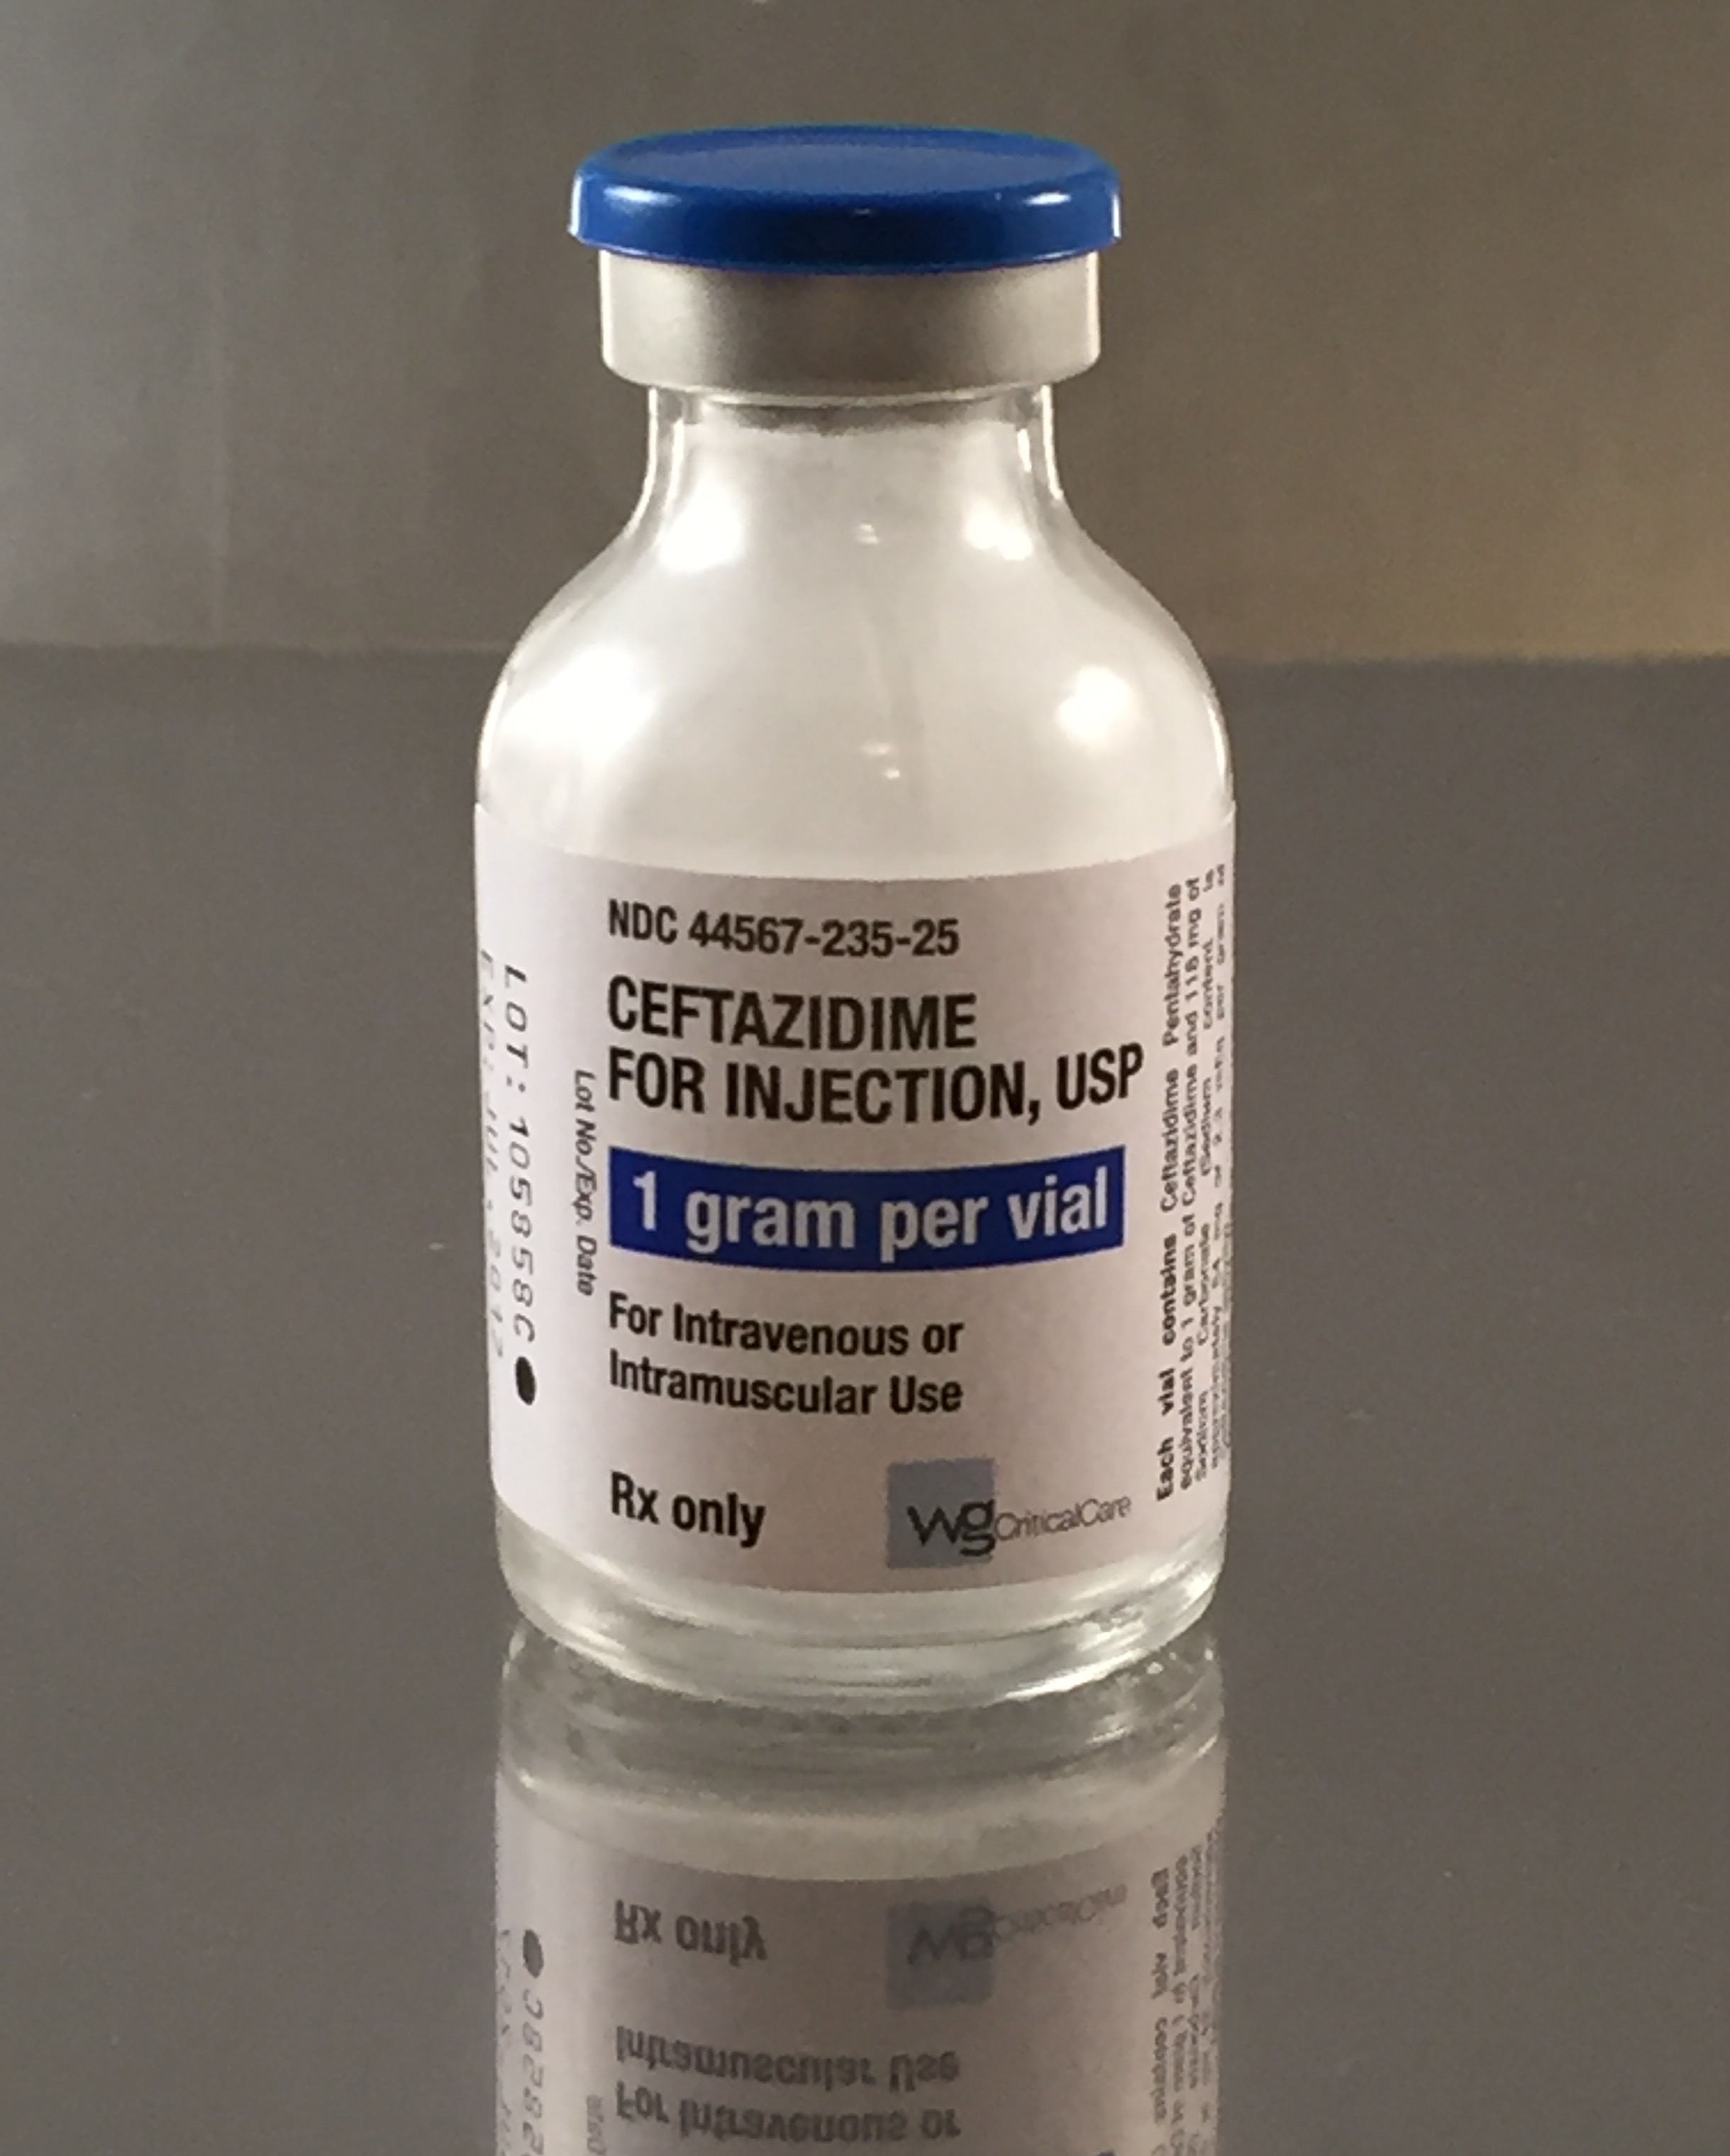 Ceftazidime for Injection for dogs, cats, and reptiles.